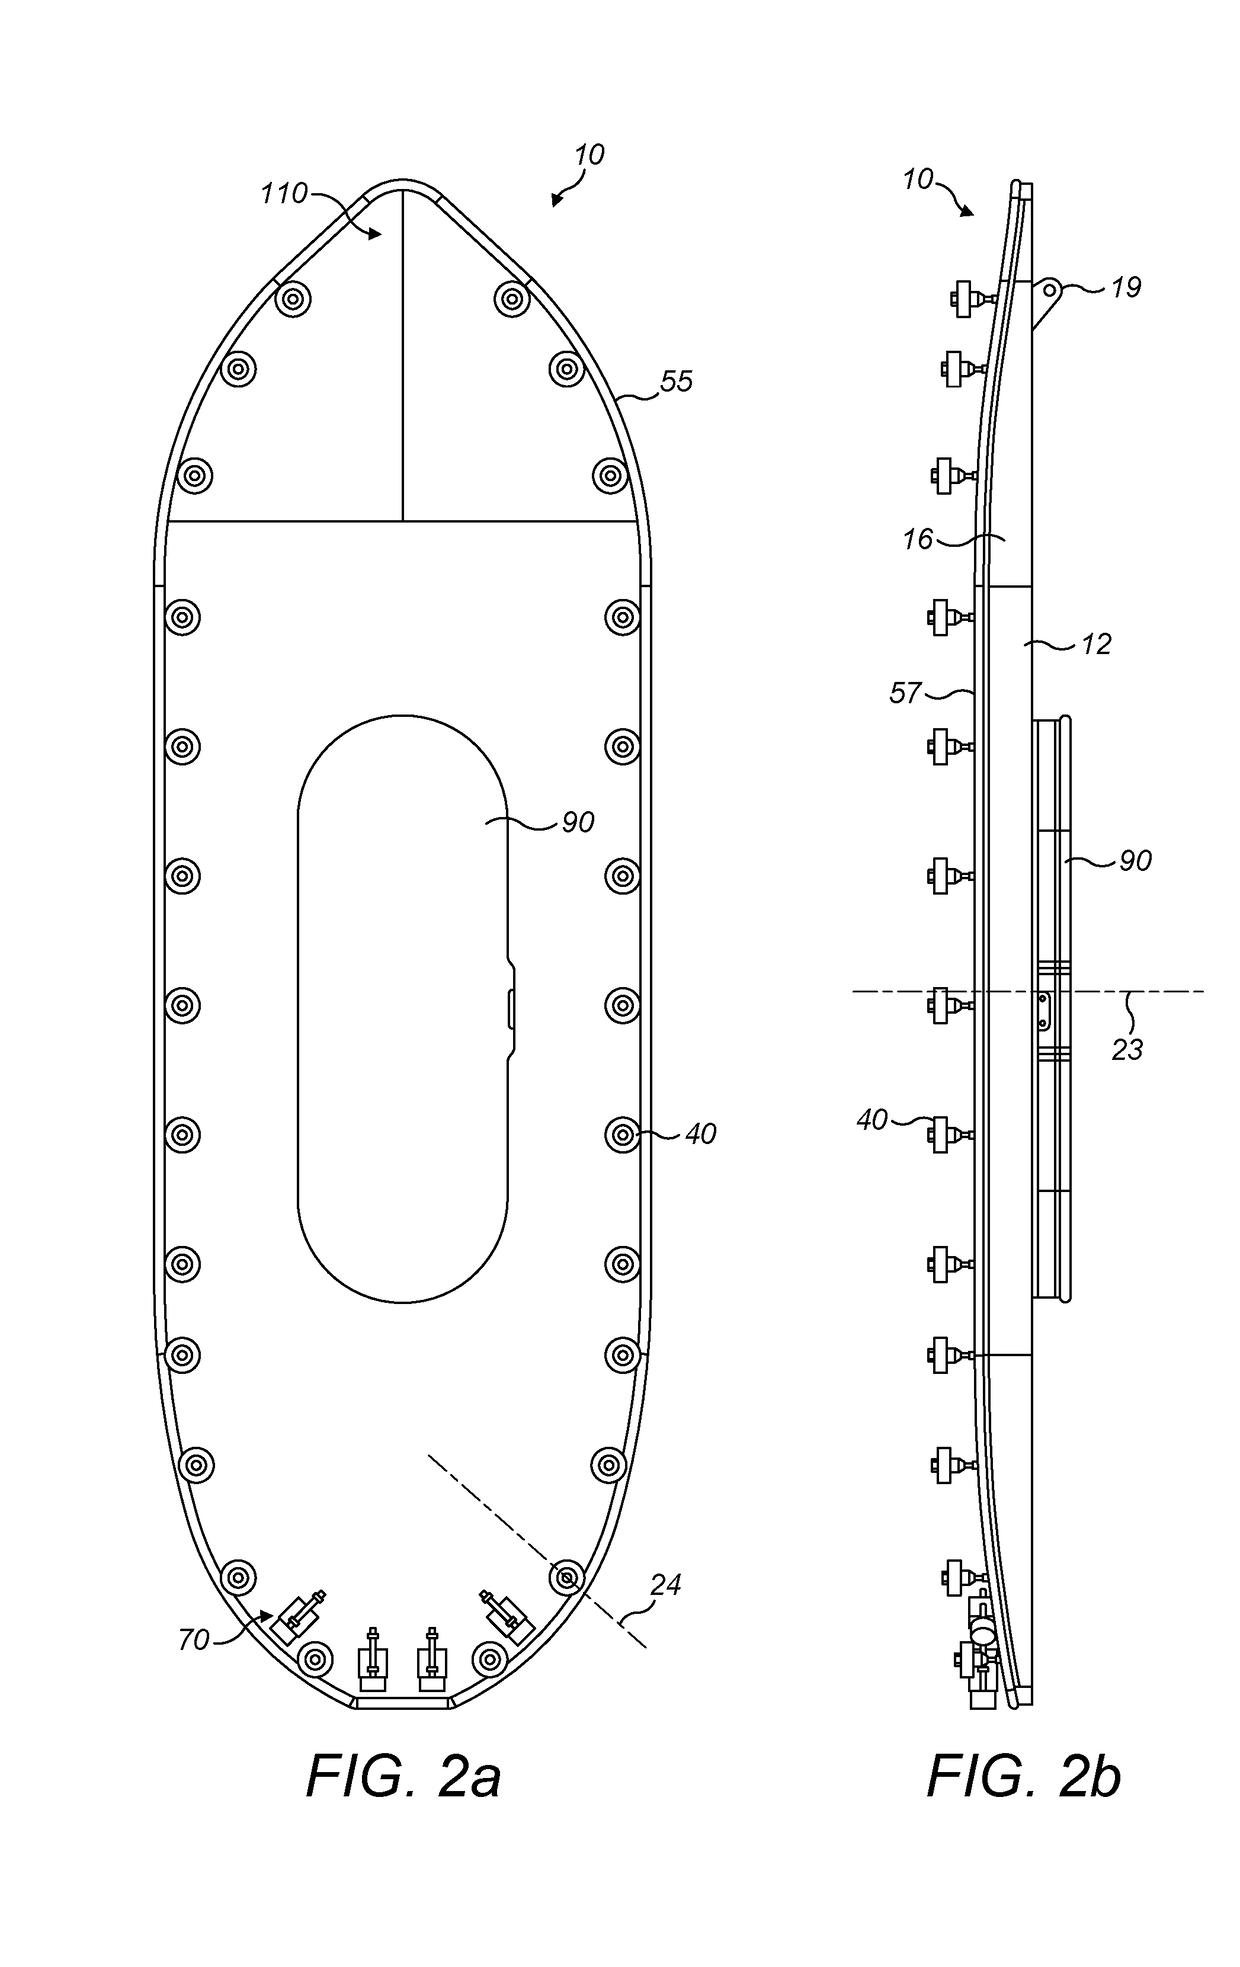 Access panel for a wind turbine tower and method for securing same